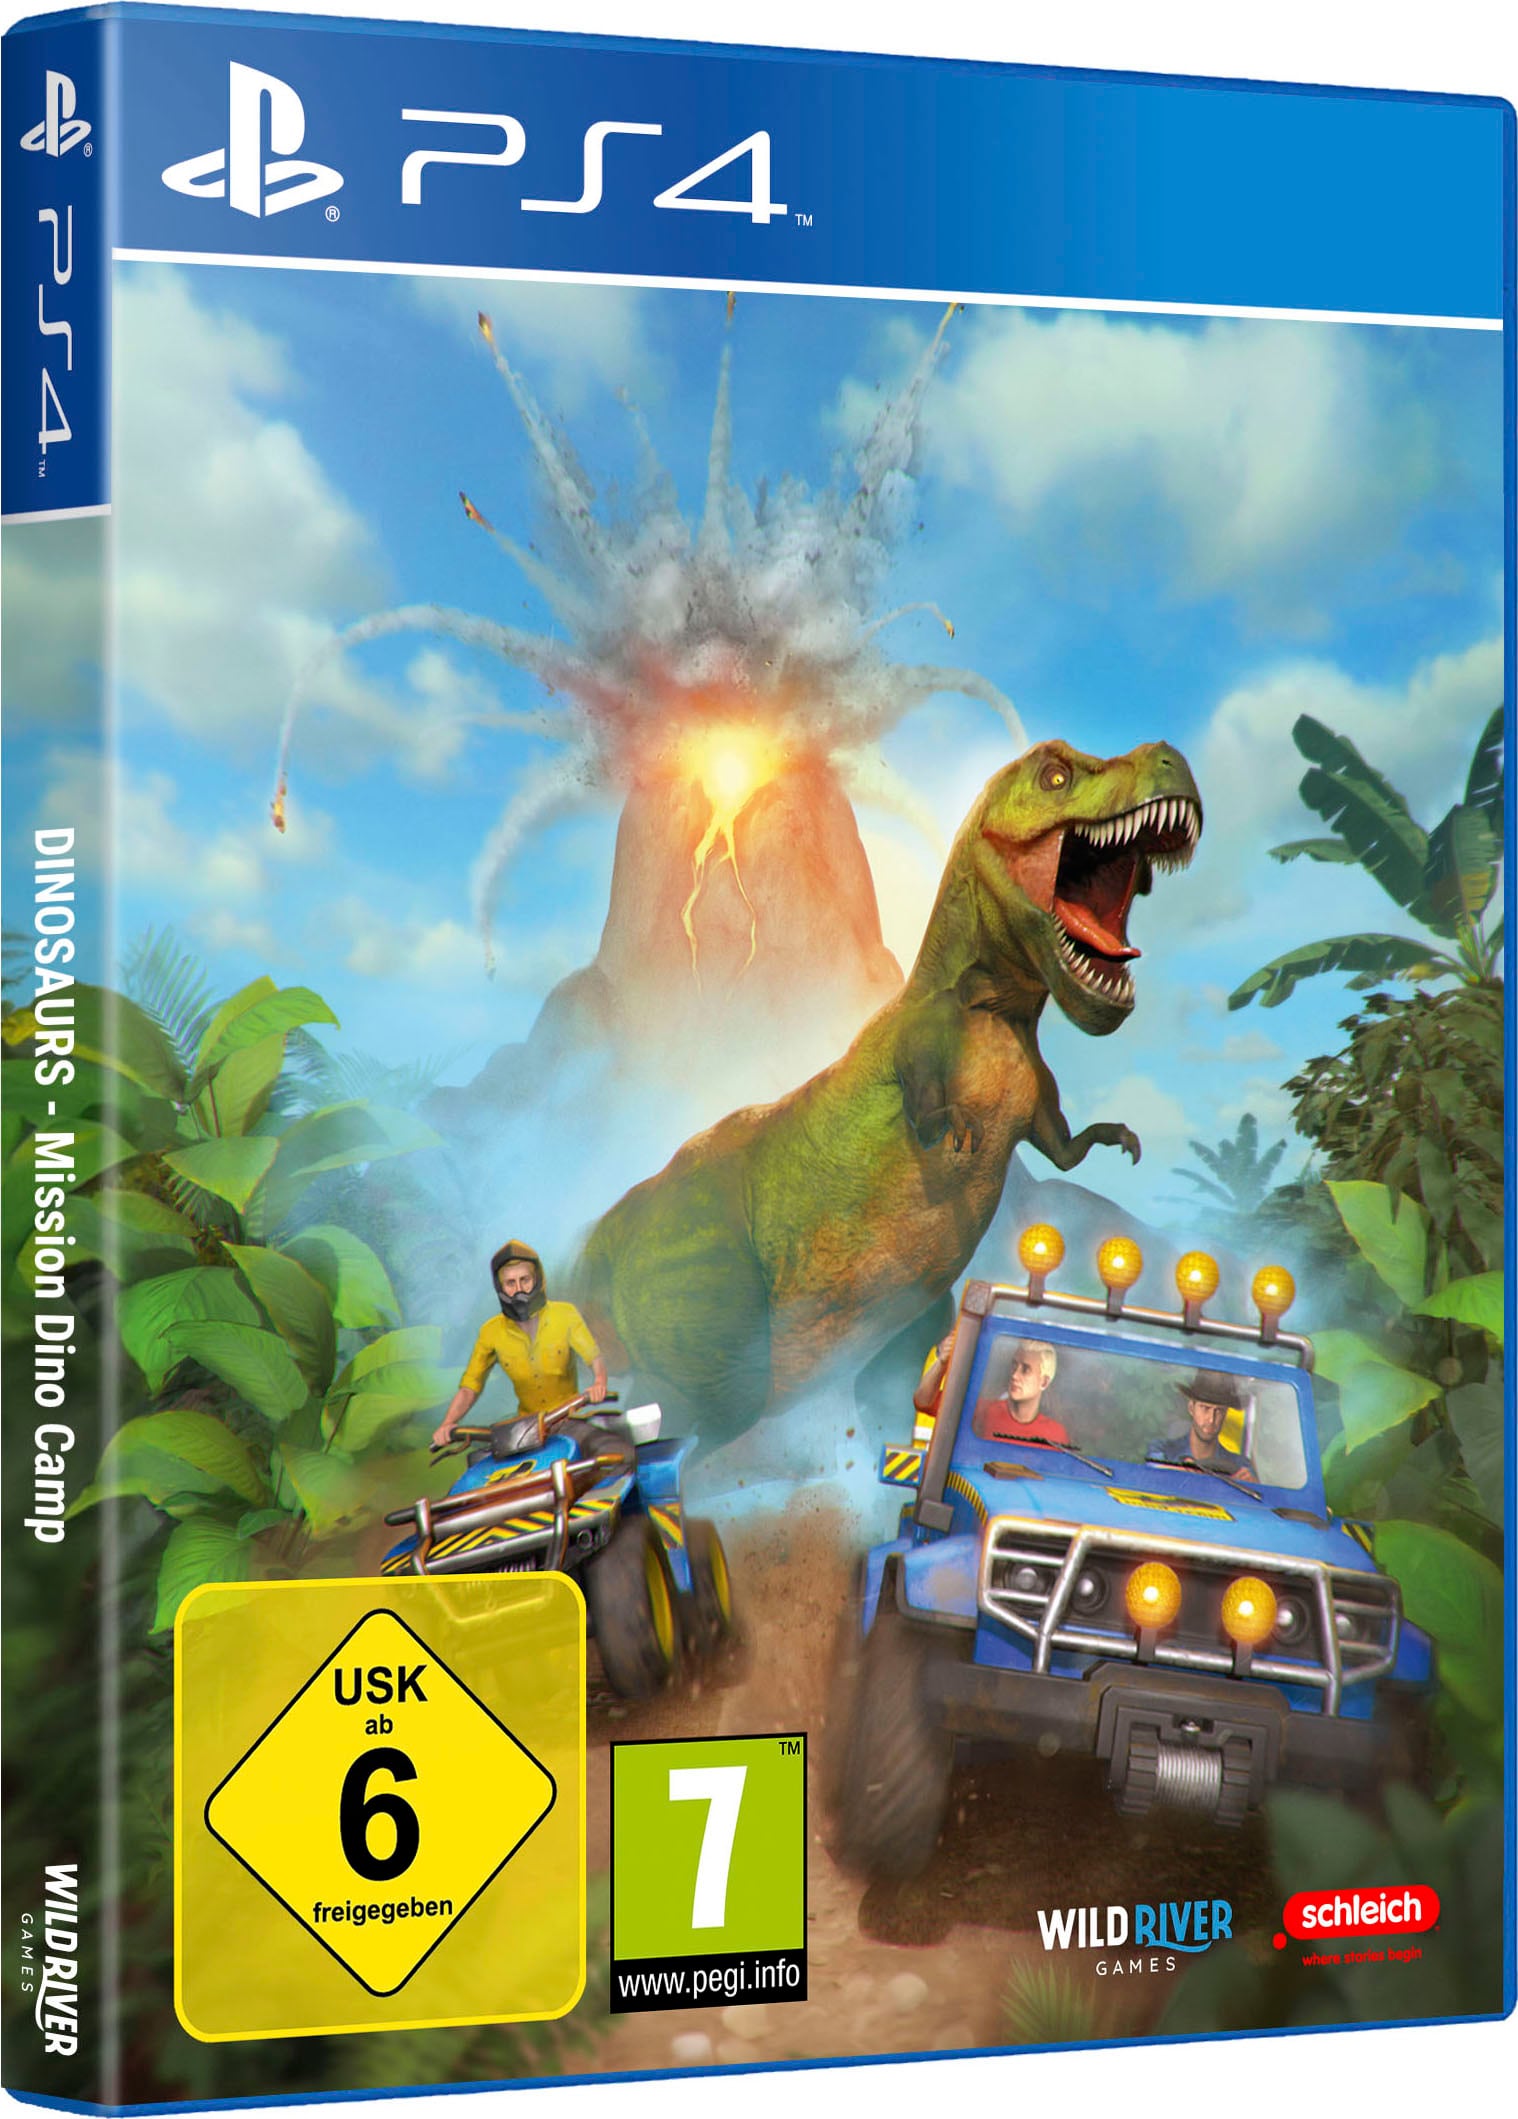 PlayStation Dino »Dinosaurs: Spielesoftware Mission Software 4 bei Camp«, Pyramide